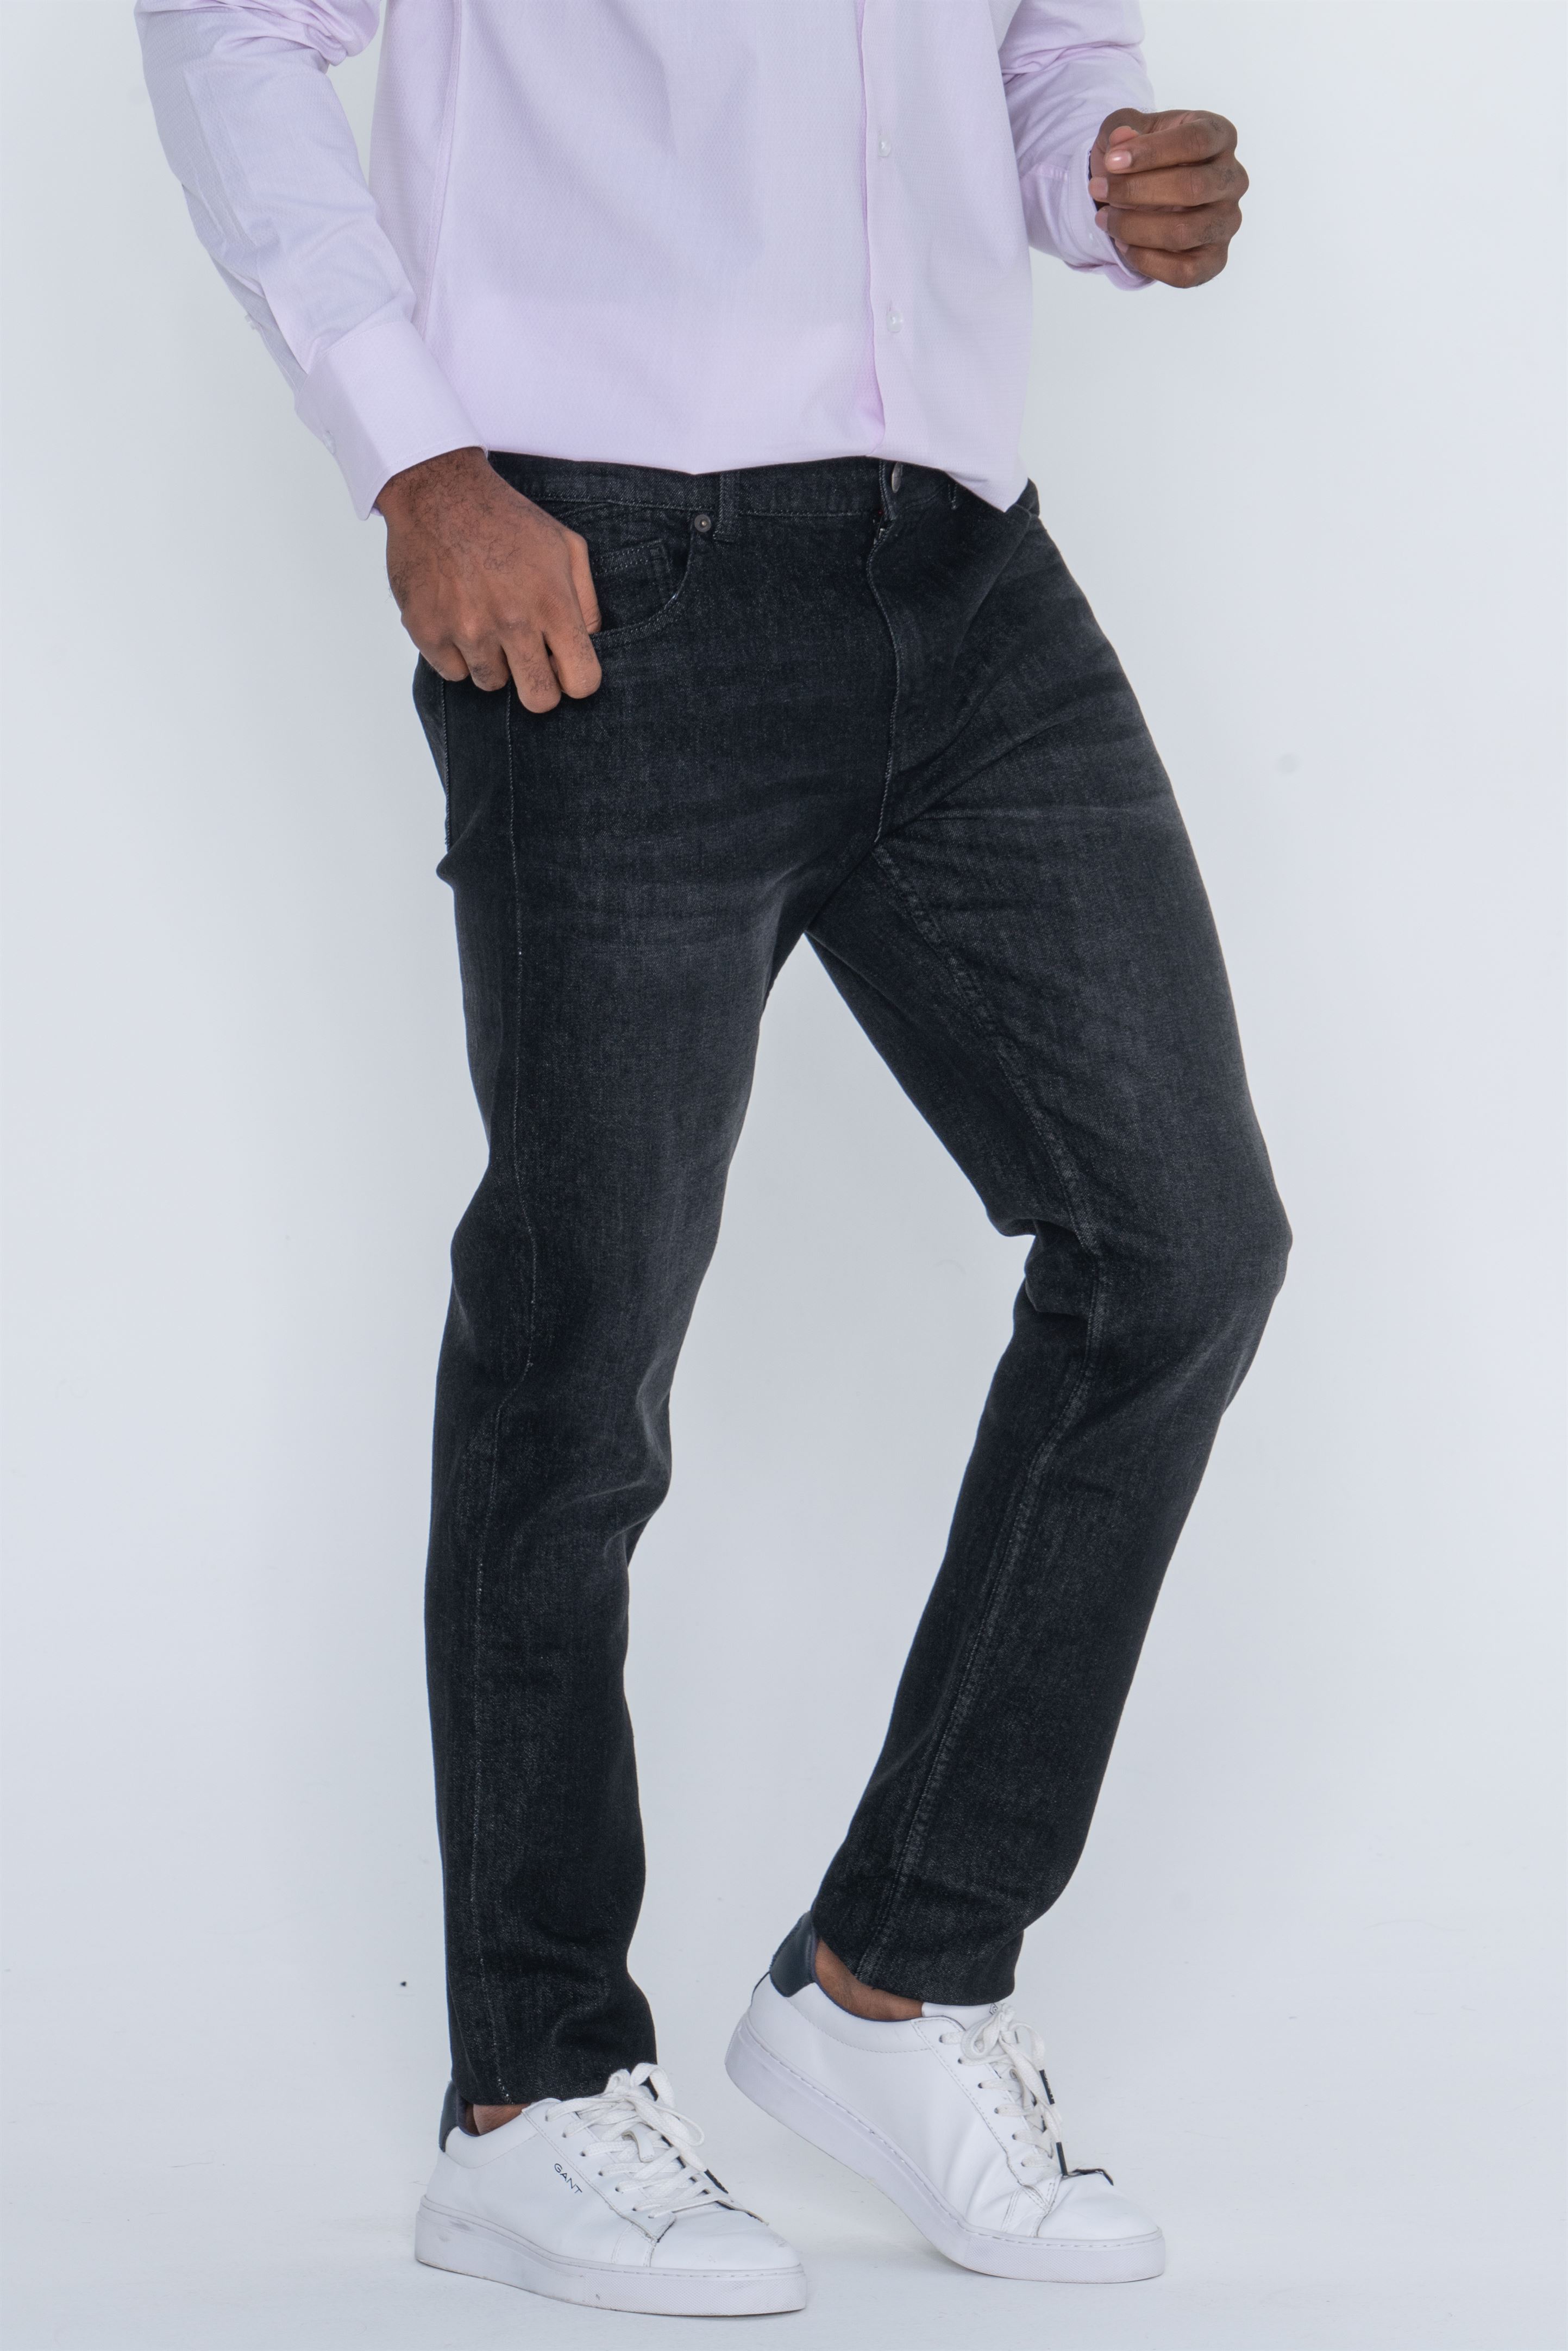 Jeans Black Casual Man